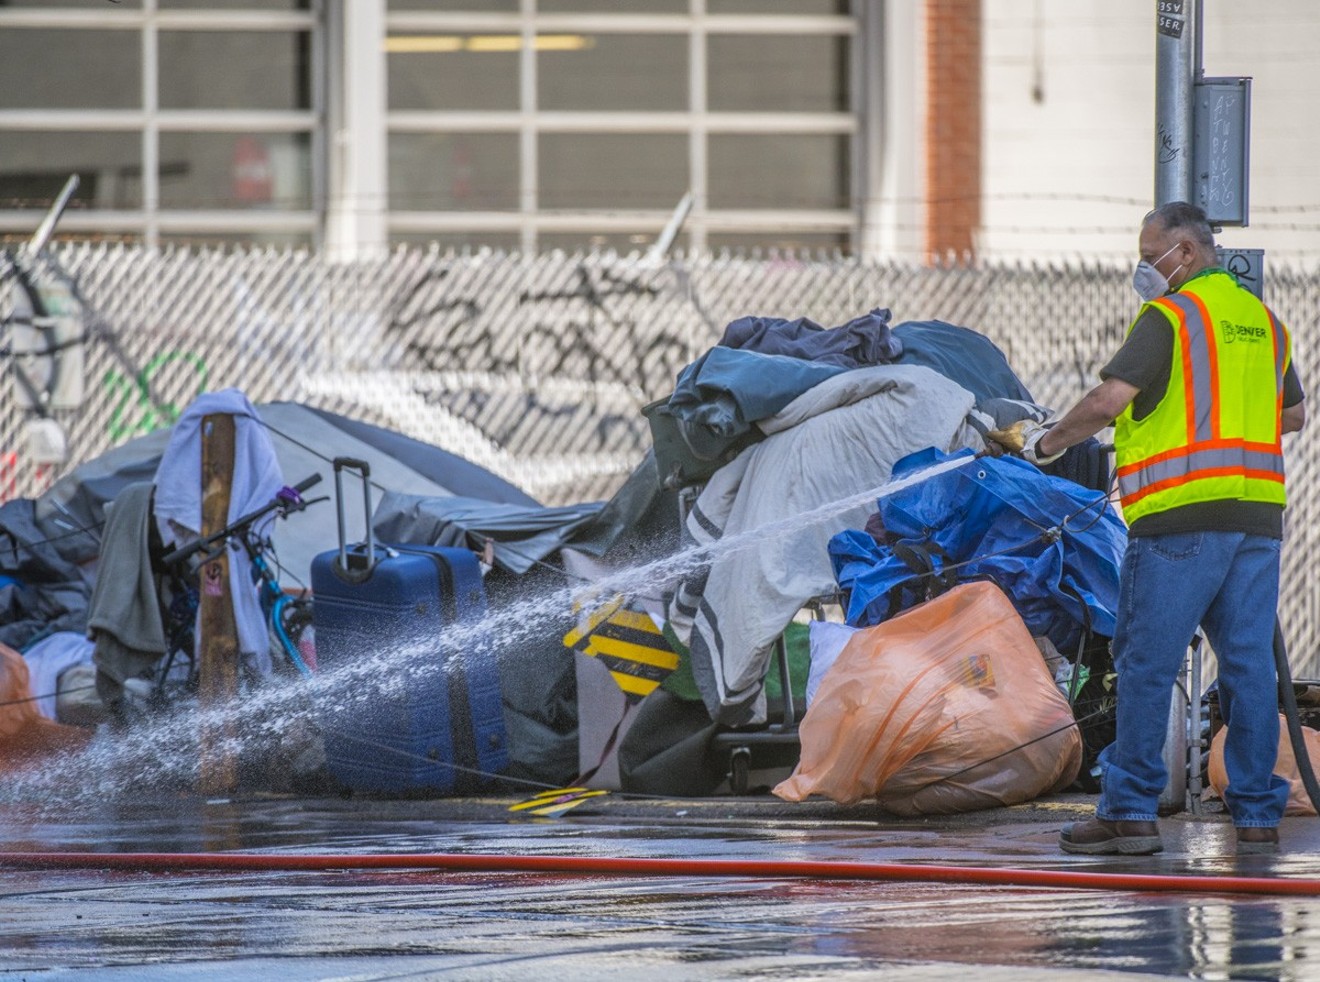 The city continues to sweep encampments. How much do these actions cost?